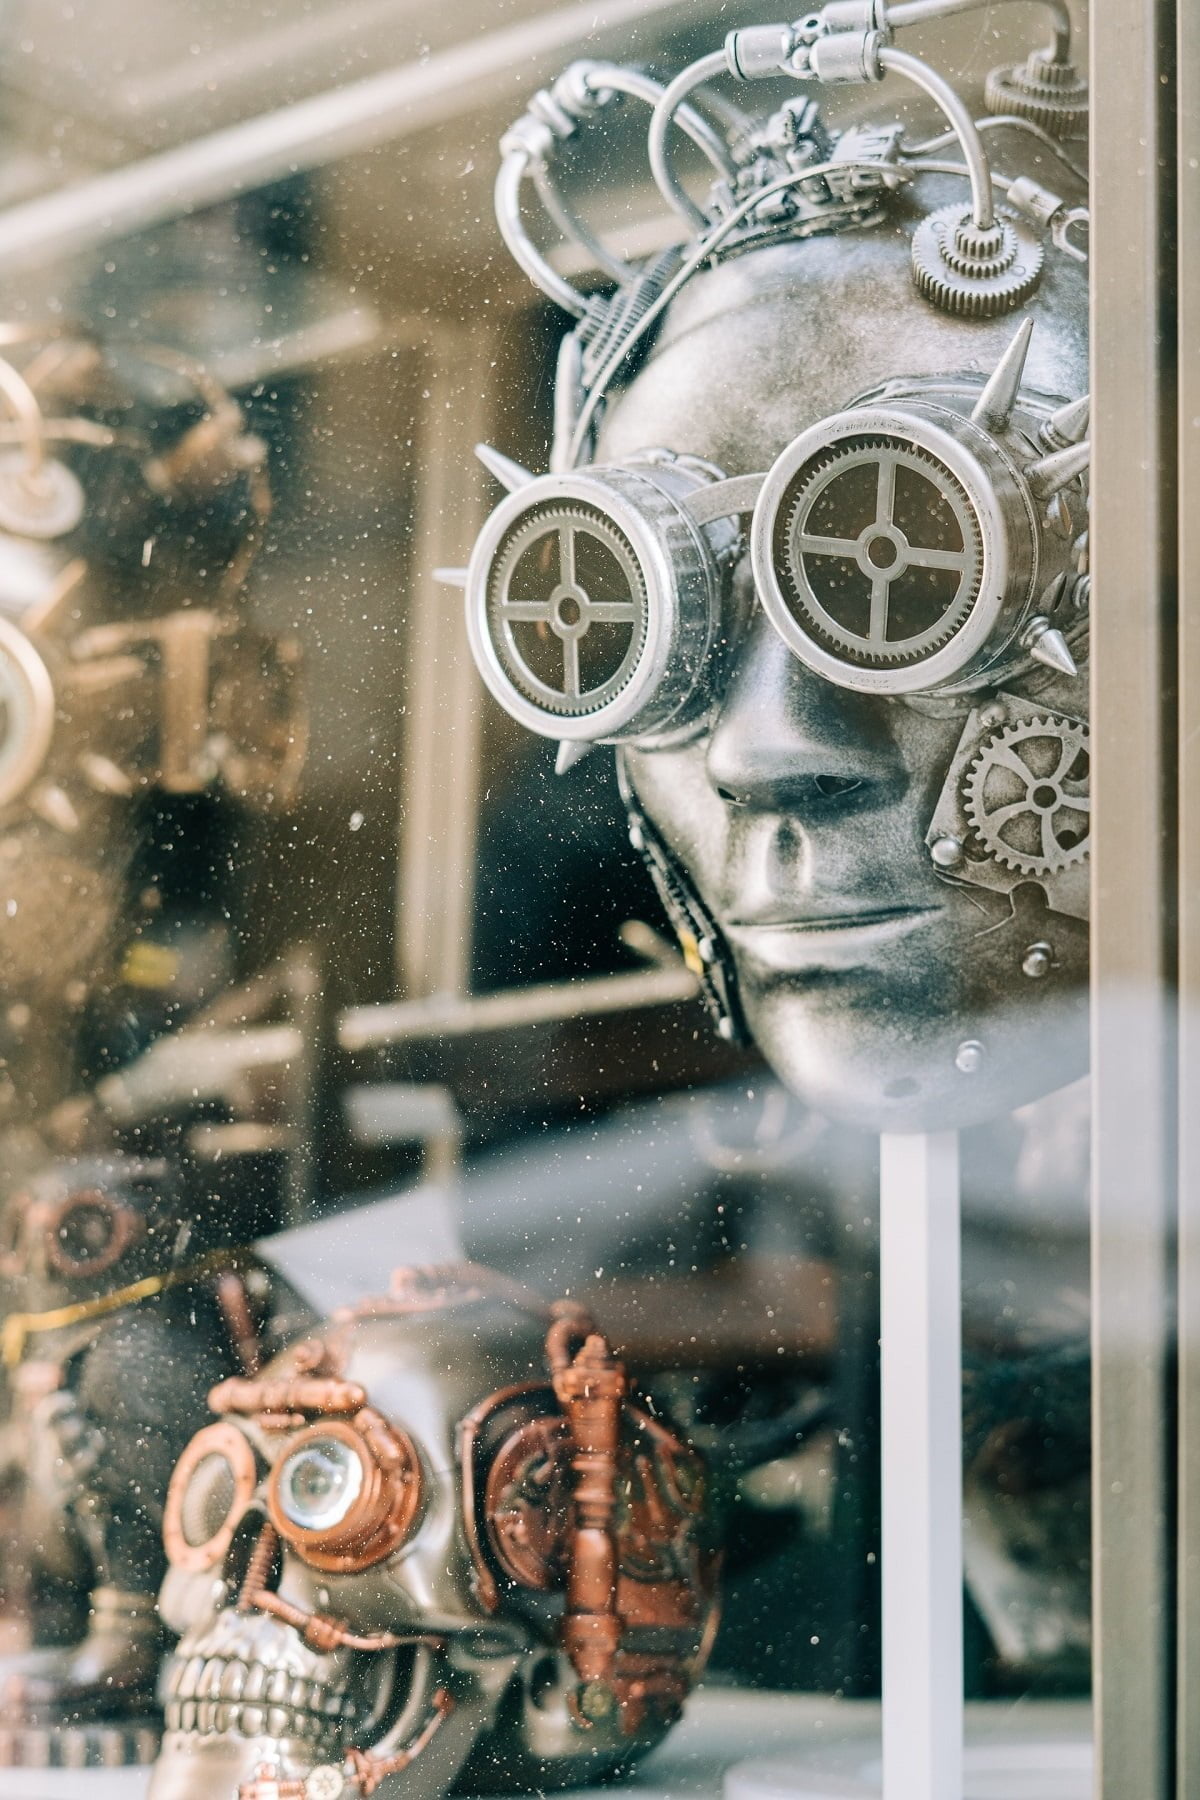 AI and Sustainability: Light reflected on a shop window containing Mad Max-like characters in Rome, Italy